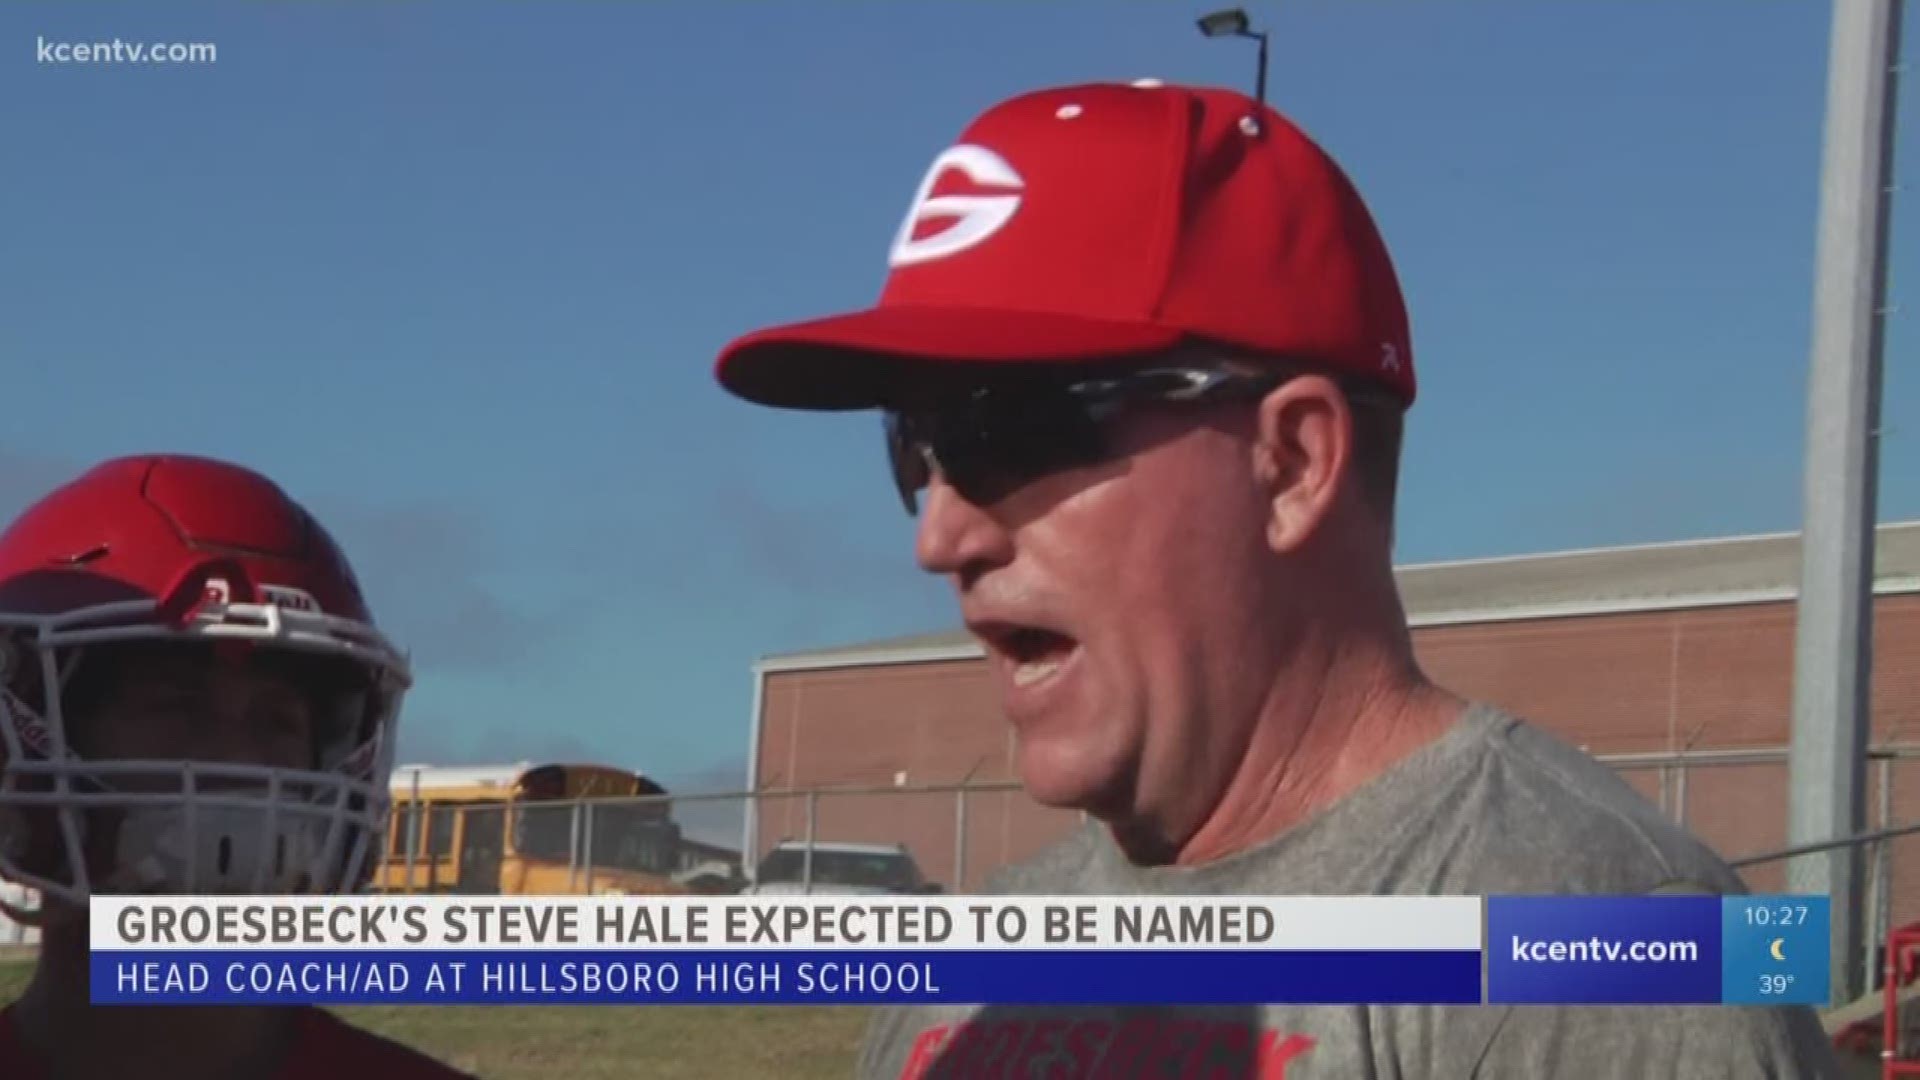 In a board meeting Wednesday night, Hillsboro High School is expected to name Groesbeck football coach Steve Hale their new head football coach and athletic director.